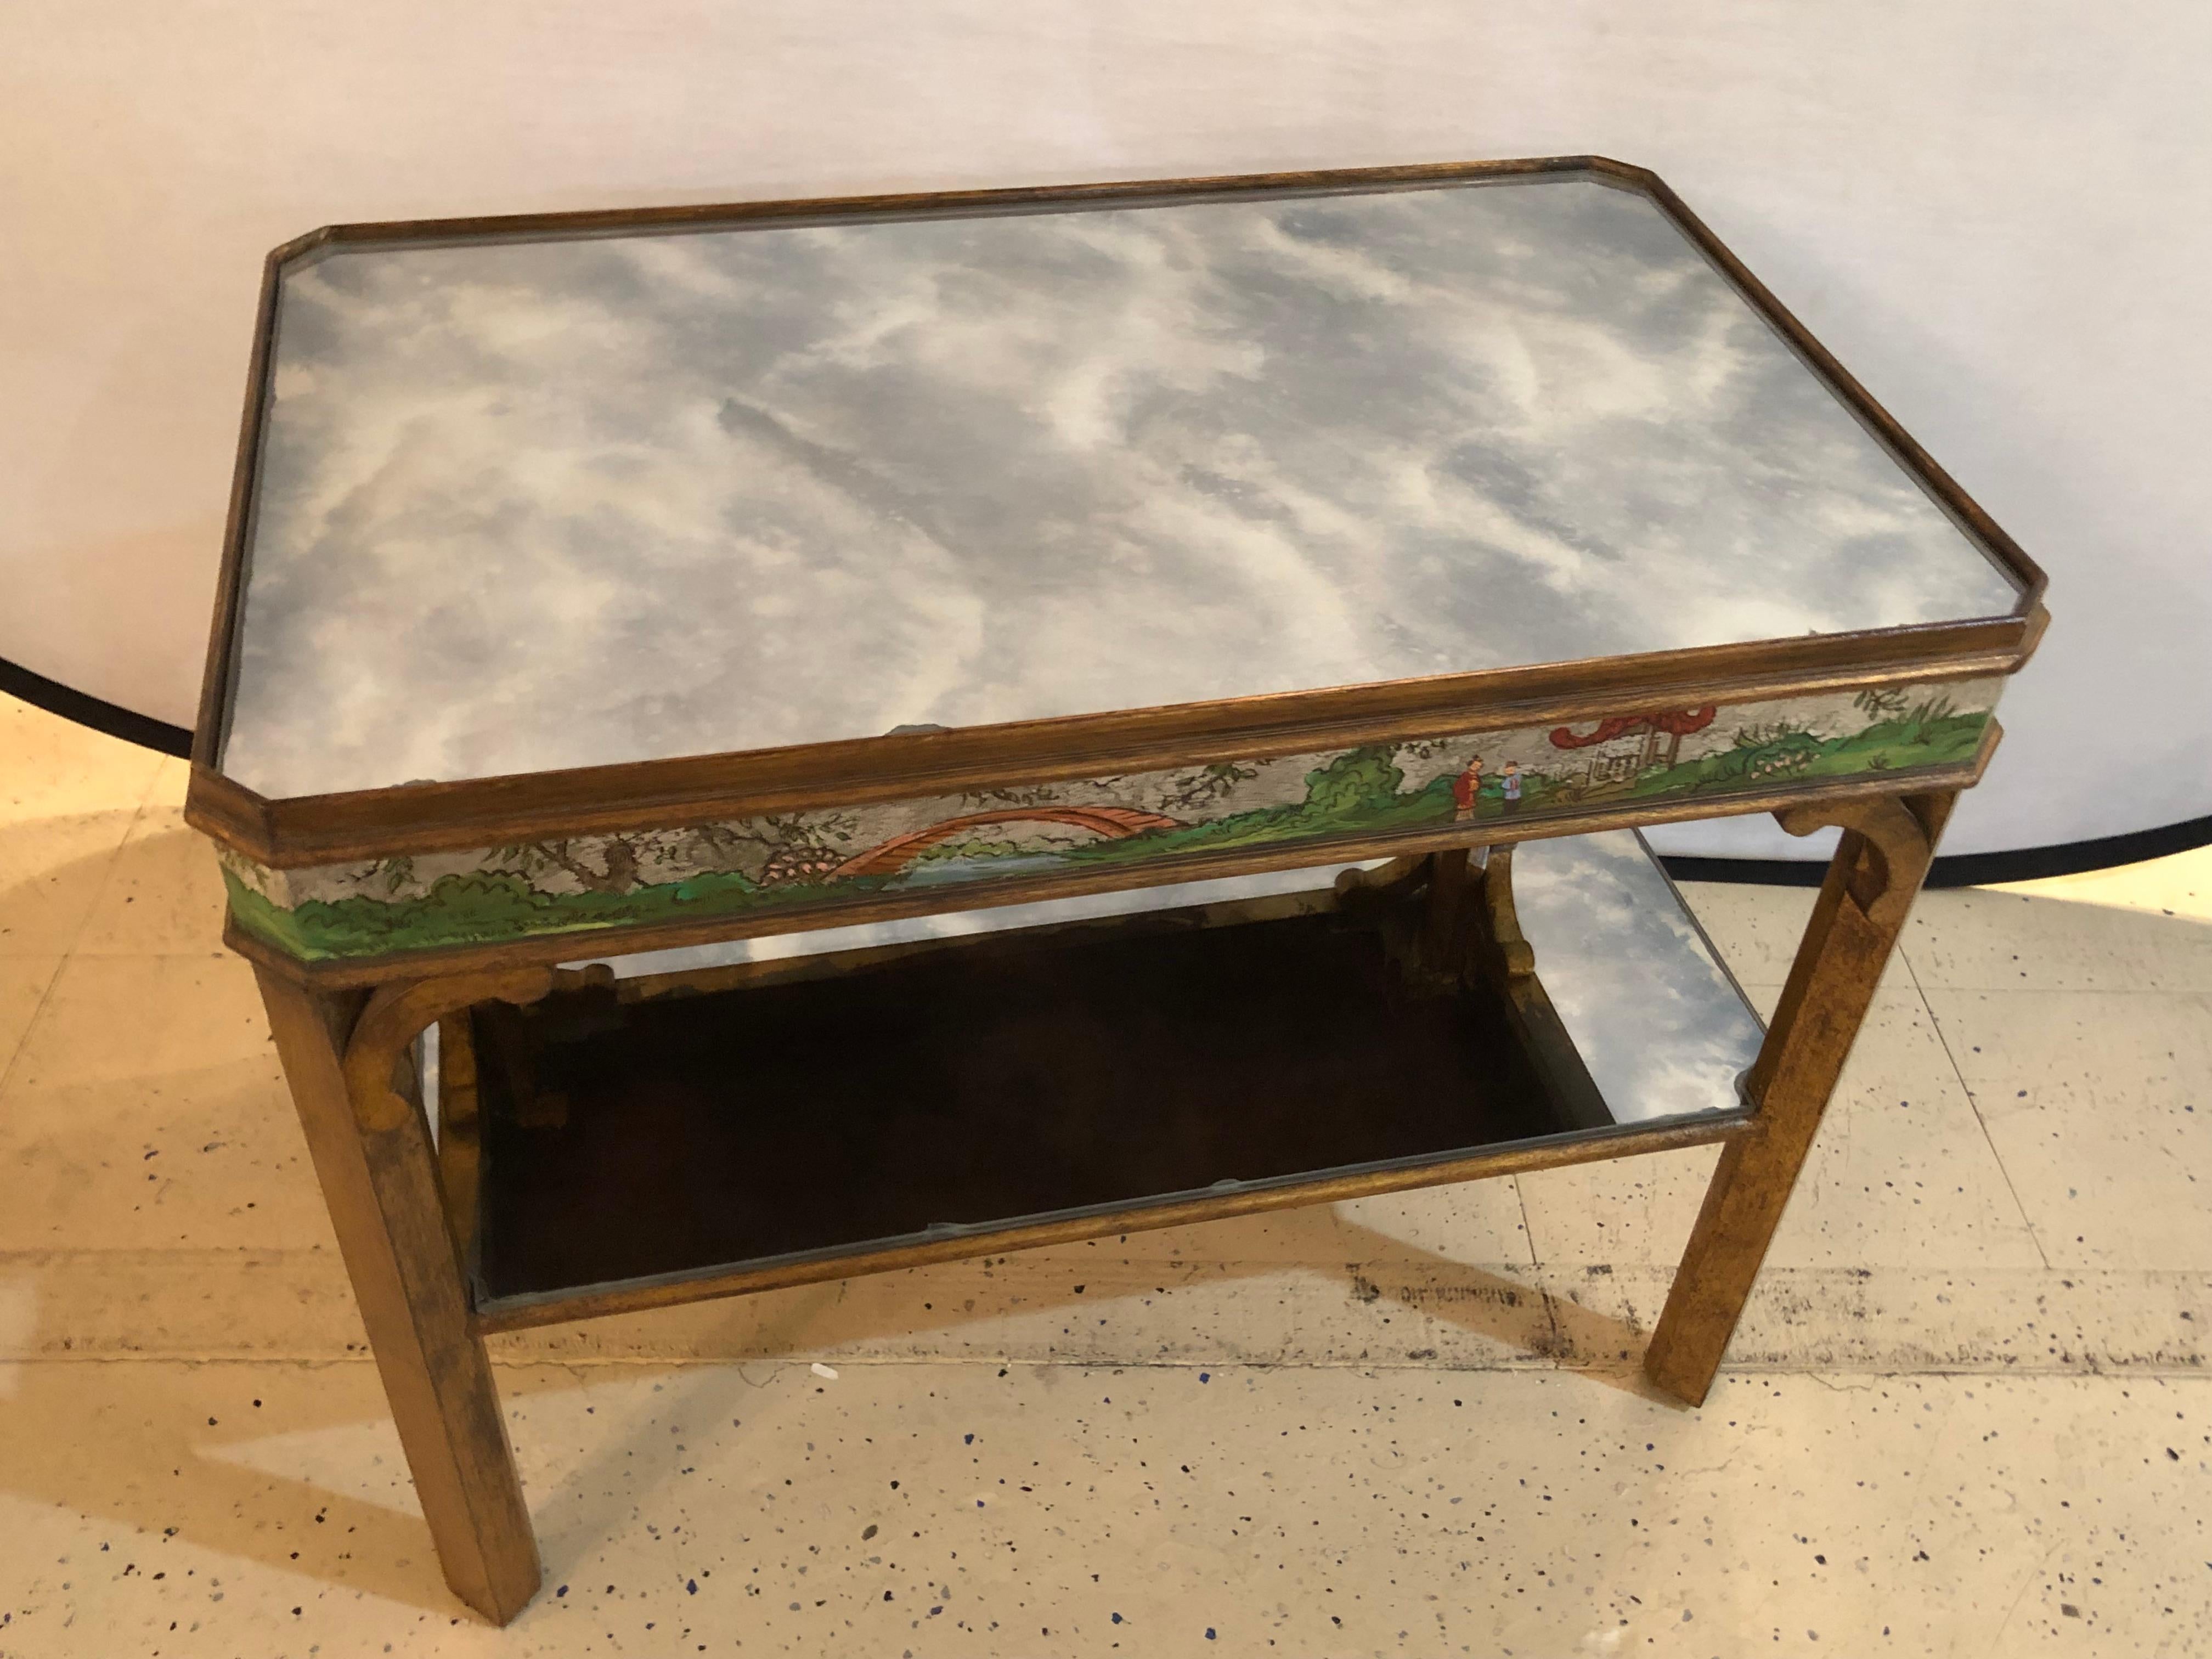 Hollywood Regency coffee table with poly-chromed mirrored scenes in chinoiserie. This stunning and very sweet coffee or low table has one lower distressed mirror shelf with a distressed mirror top supported by a gilt gold frame flanking a mirrored